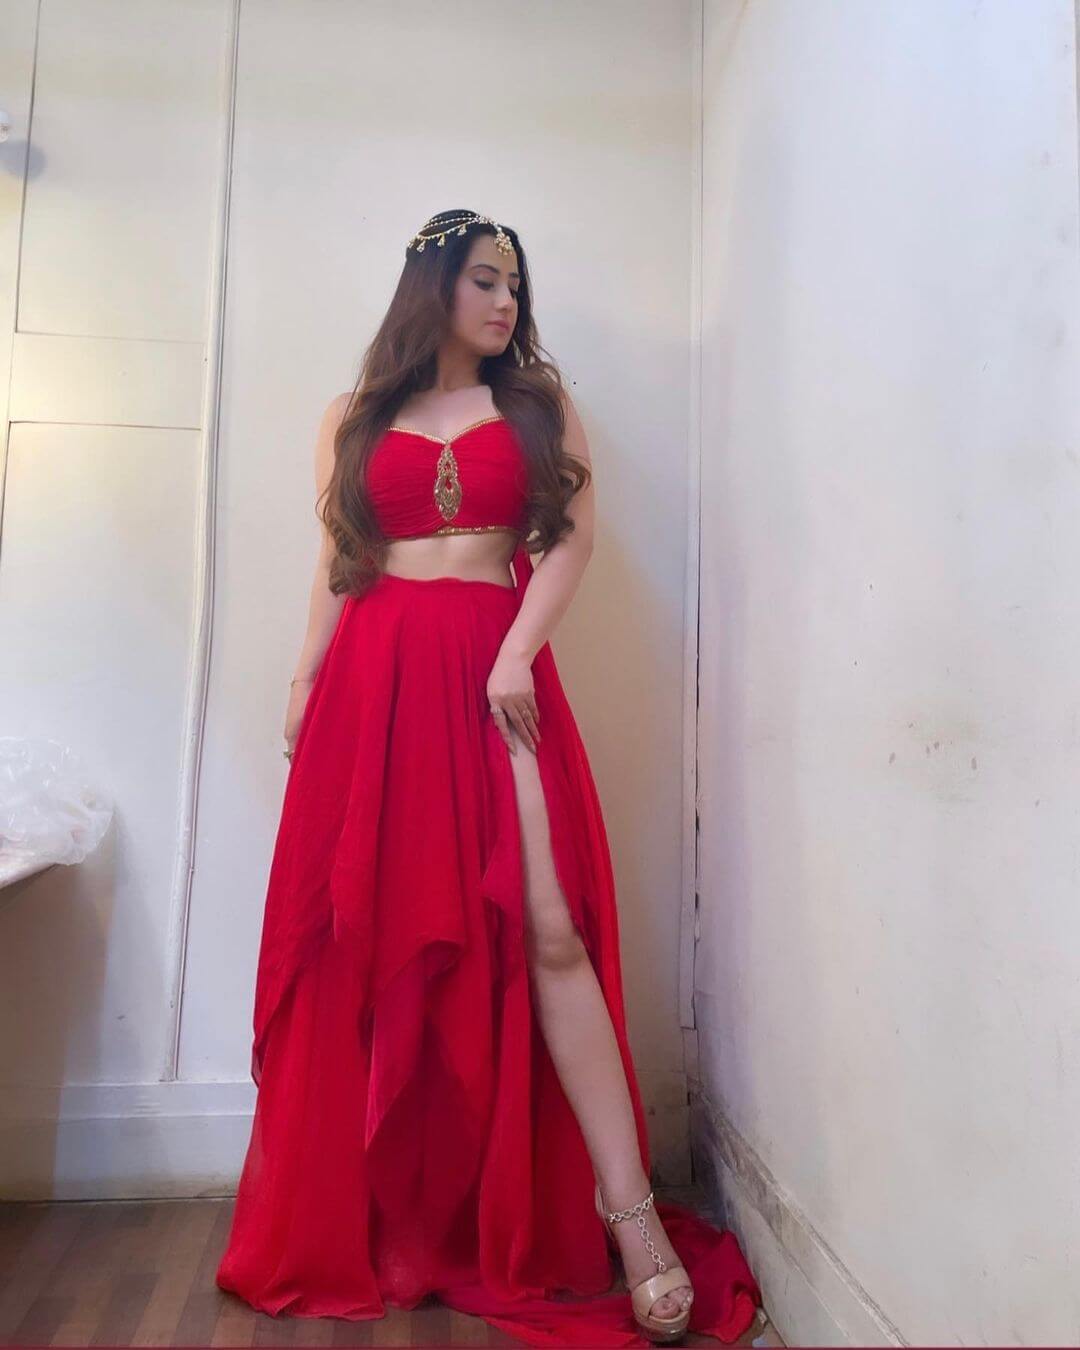 Aalisha Panwar Look Diva In Red Crop Top With High Slit Red Skirt Outfit Aalisha Panwar Fashionable Outfit Inspo